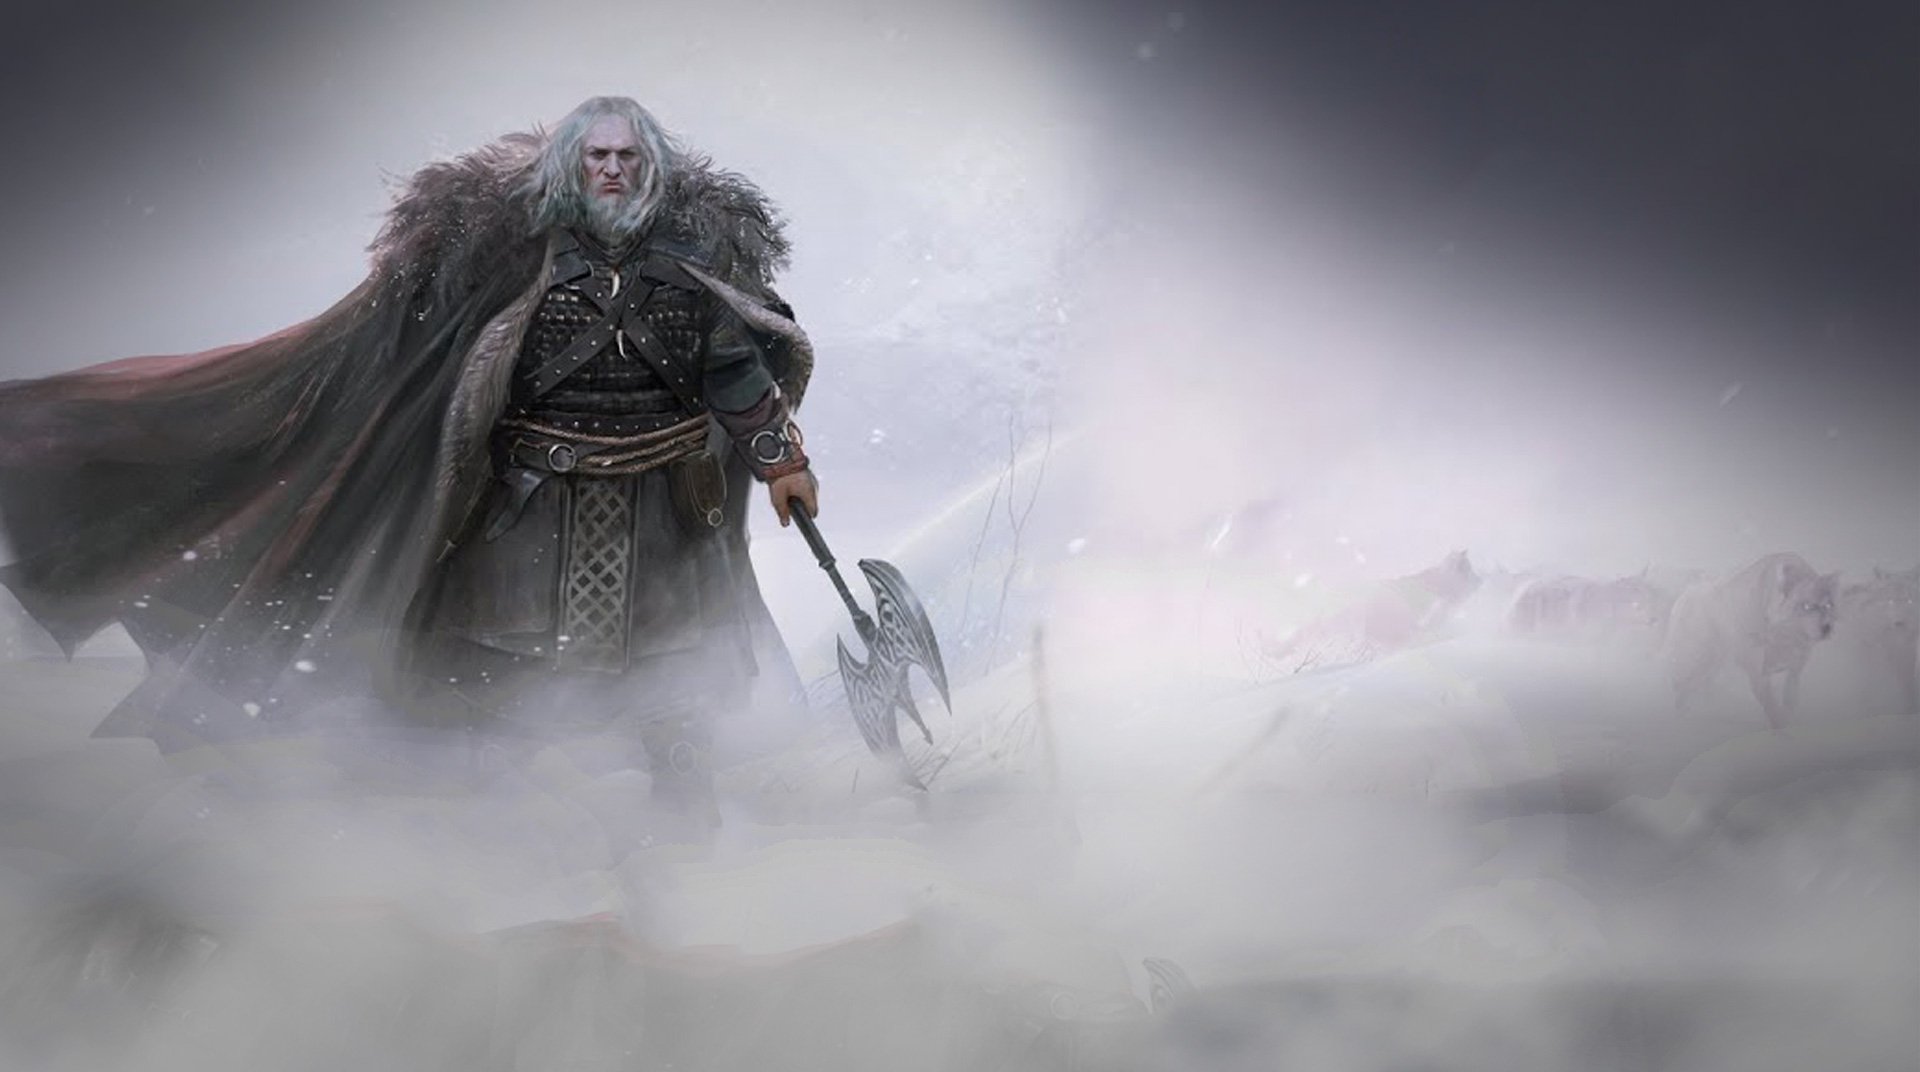 Frostborn: Action RPG